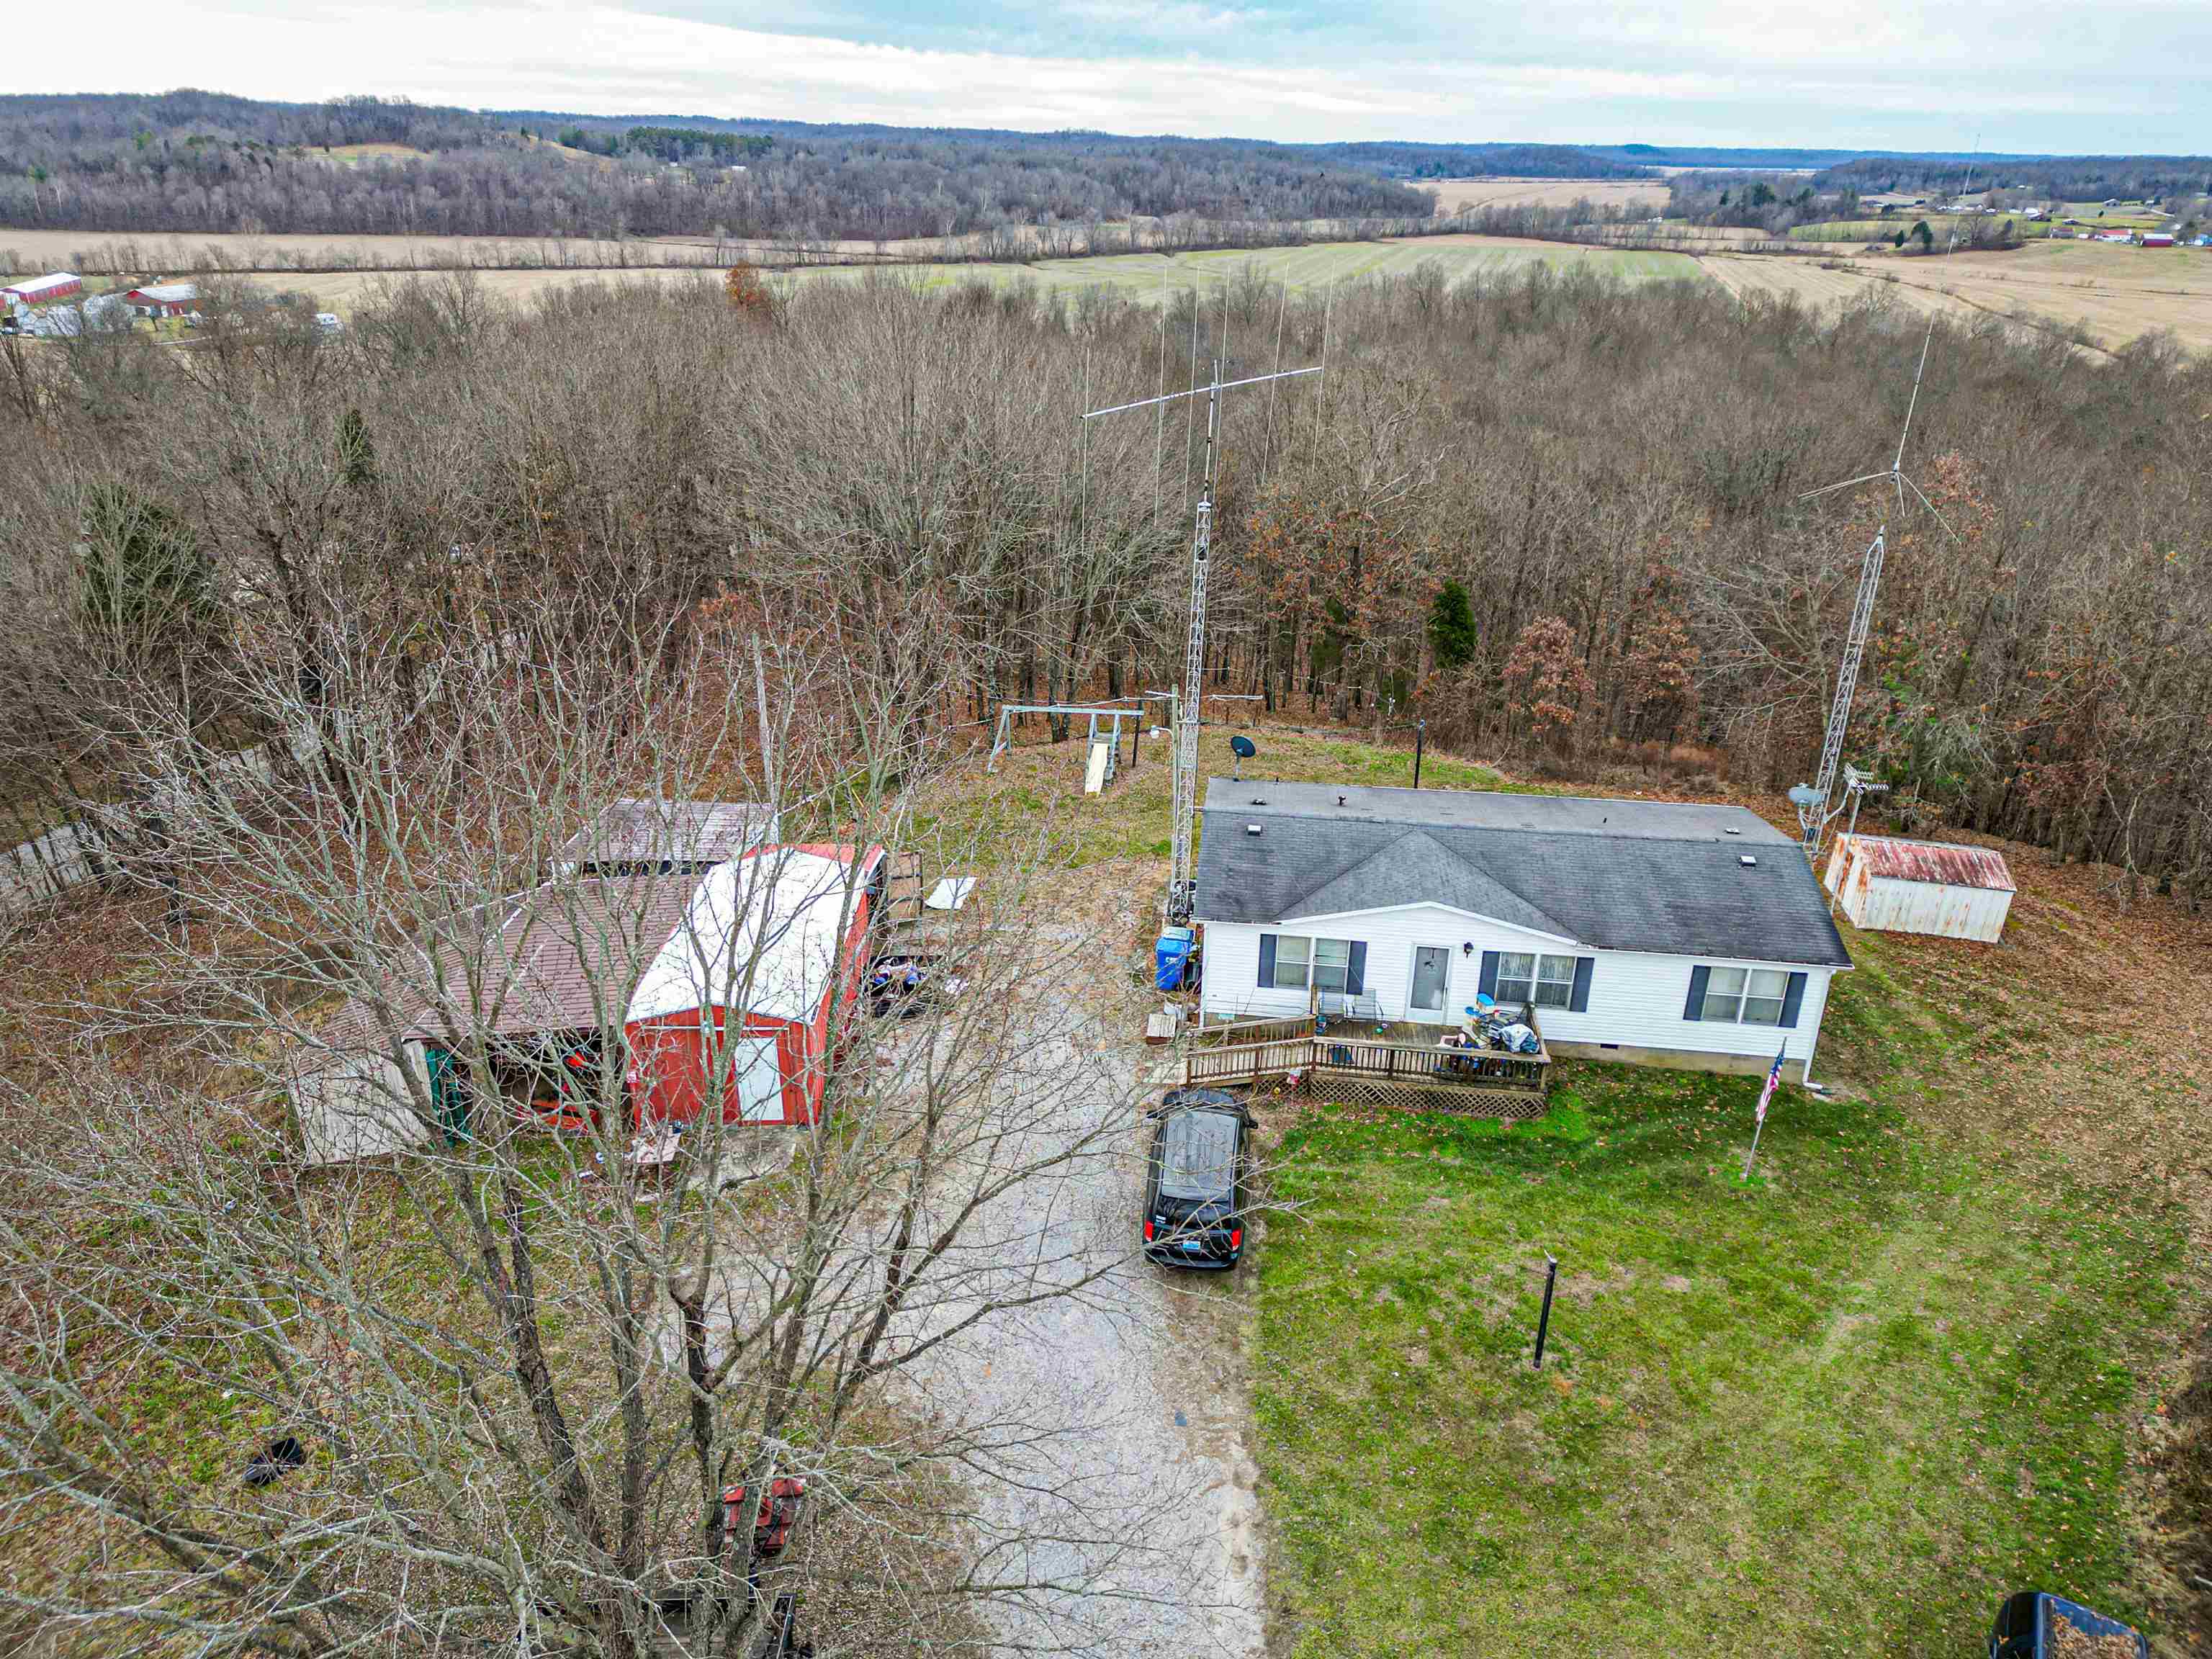 1985 Fred Morris Rd., Reynolds Station, Kentucky 42368, 3 Bedrooms Bedrooms, ,2 BathroomsBathrooms,Farm,For Sale,Fred Morris Rd.,88618